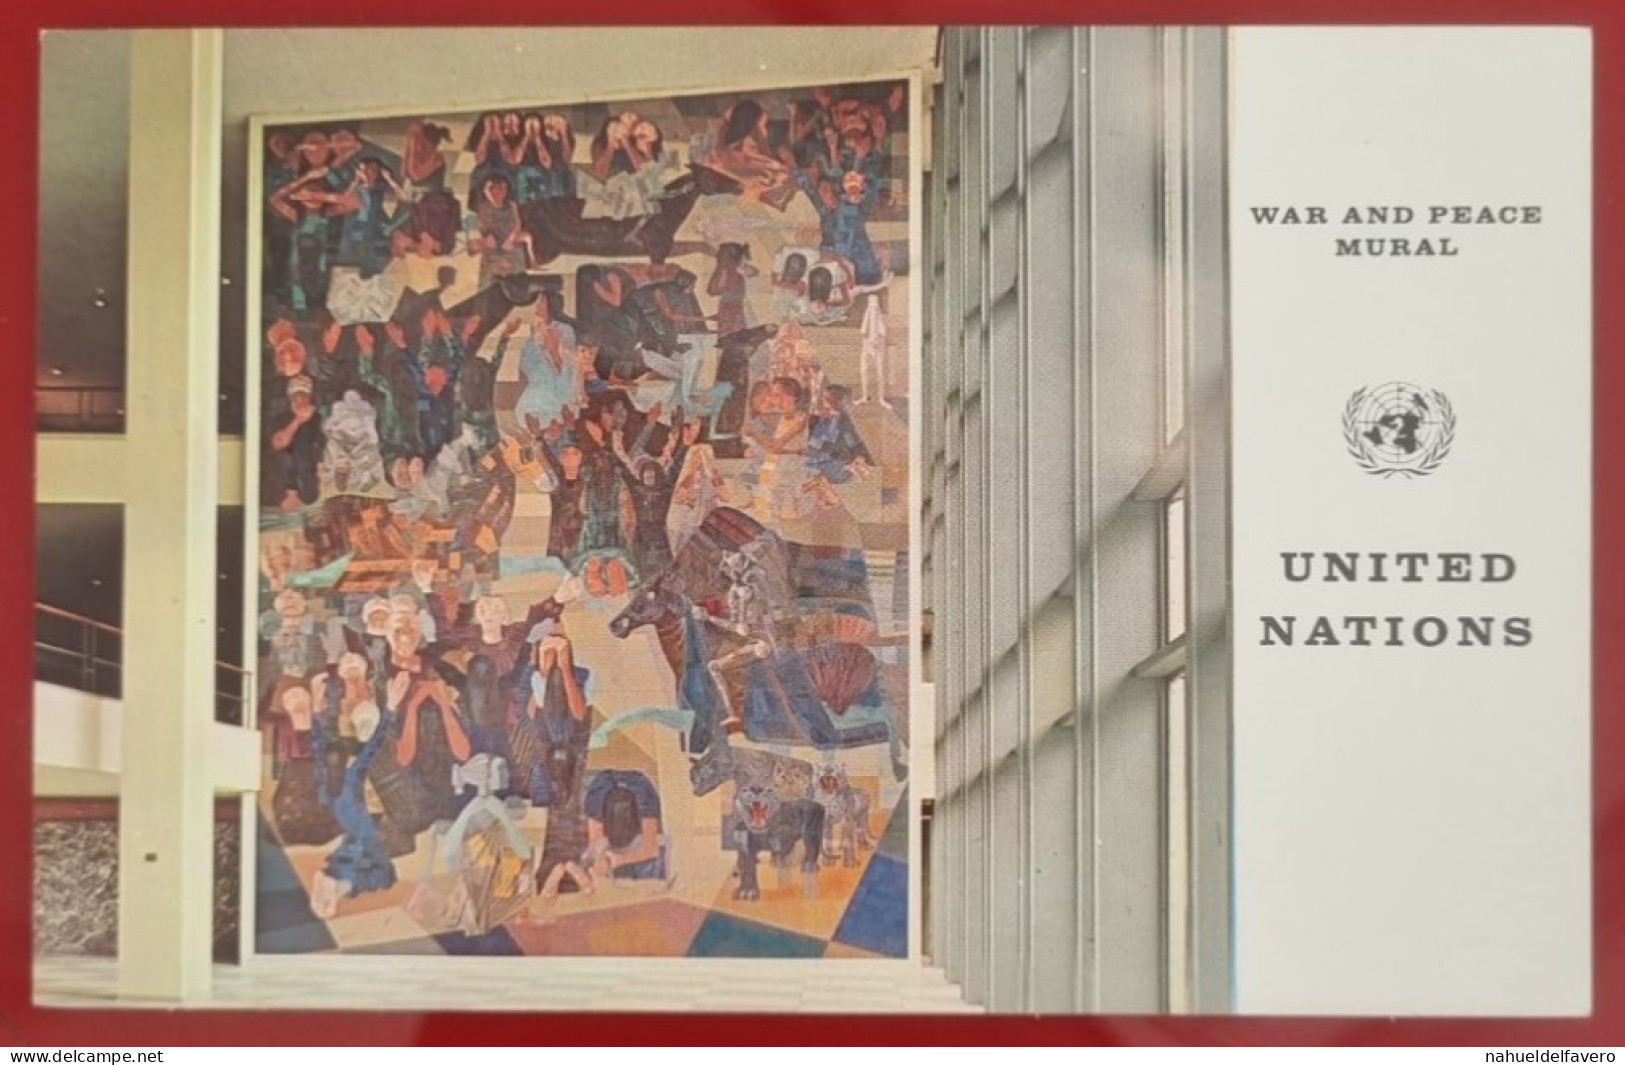 Uncirculated Postcard - USA - NY, NEW YORK CITY - UNITED NATIONS, ONE OF THE TWO MURALS, "WAR" AND "PEACE" BY PORTINARI - Lugares Y Plazas